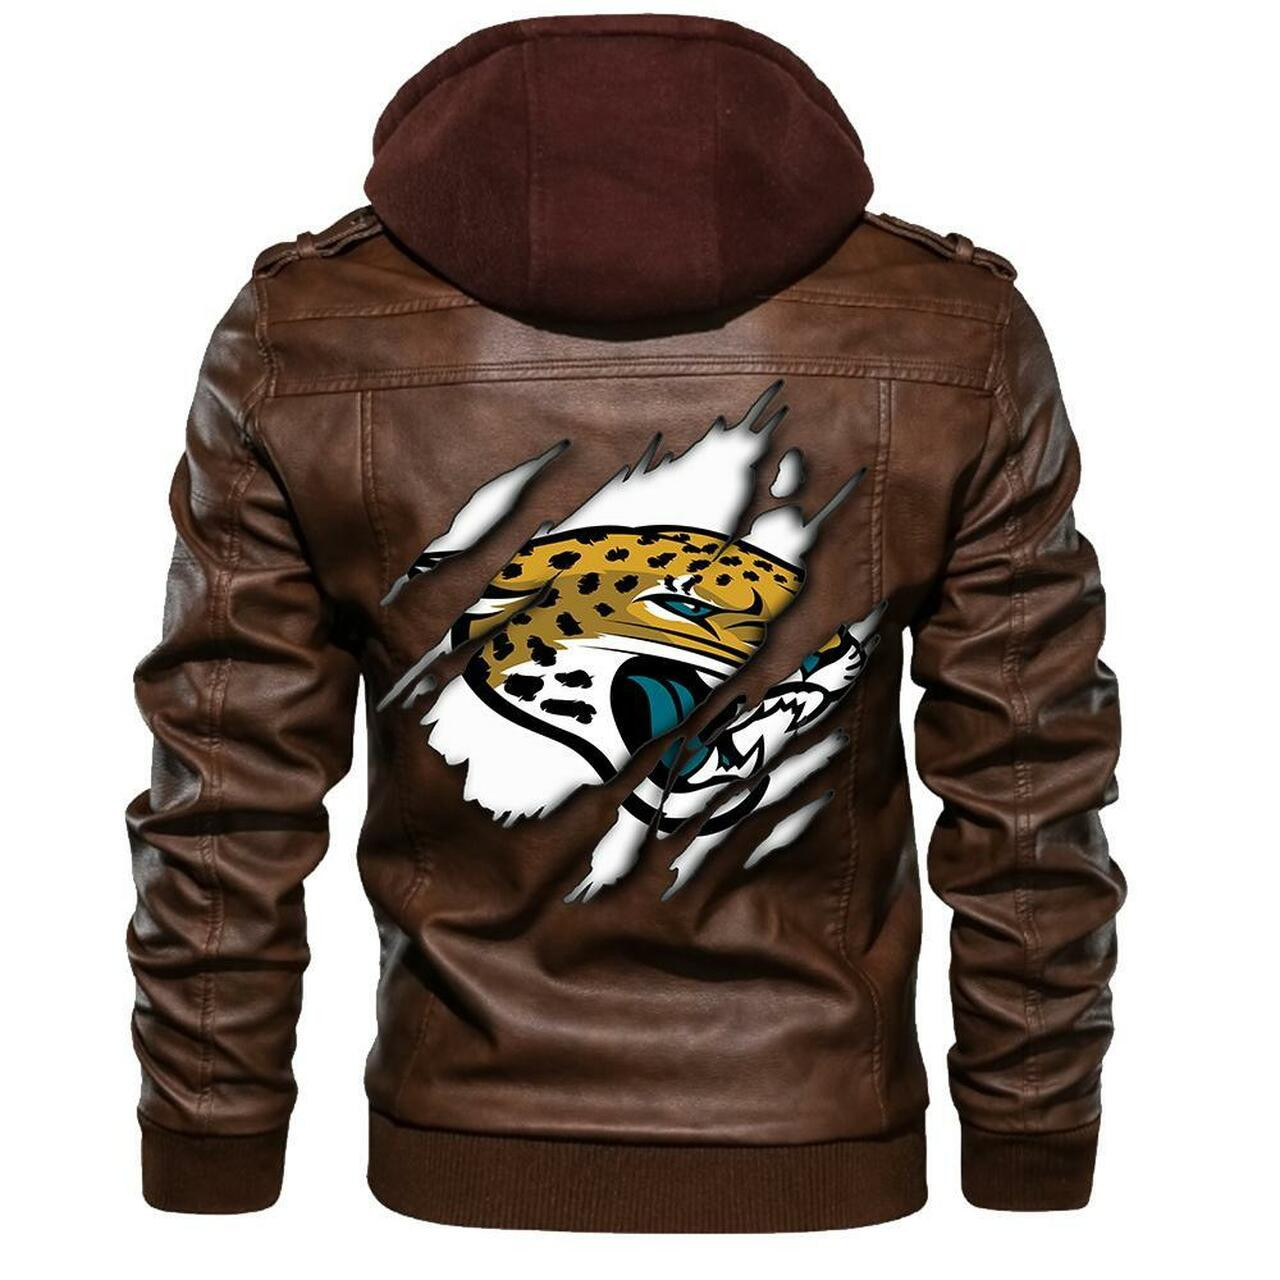 Our store has all of the latest leather jacket 145